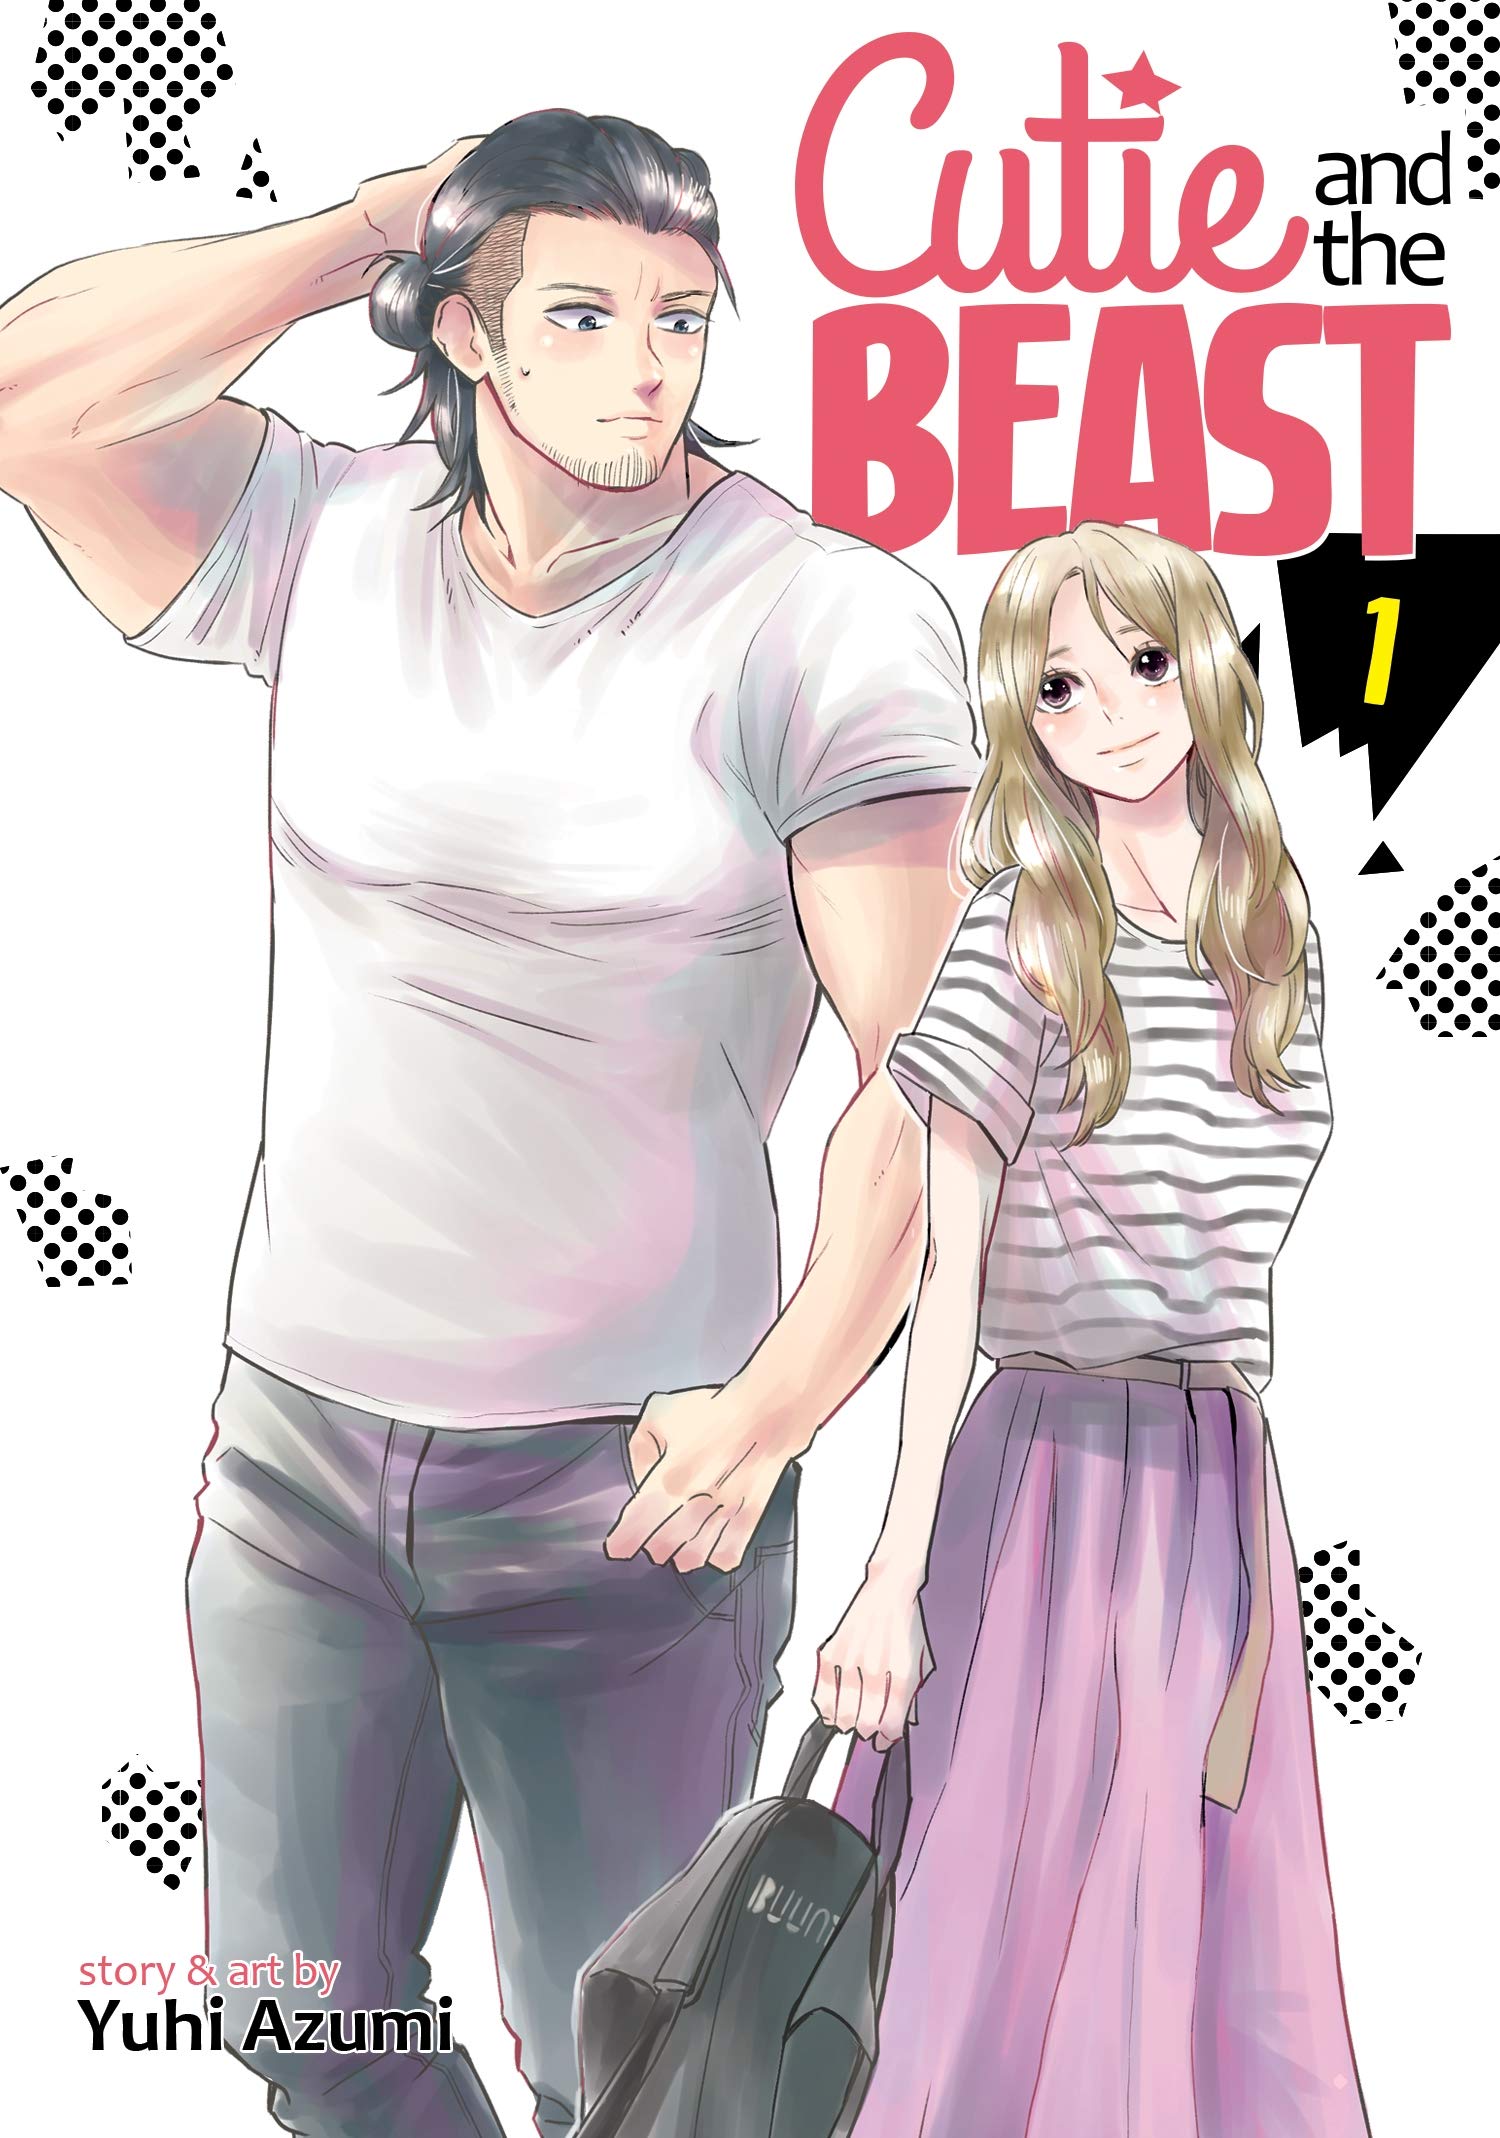 Cutie and the Beast. Volume 1